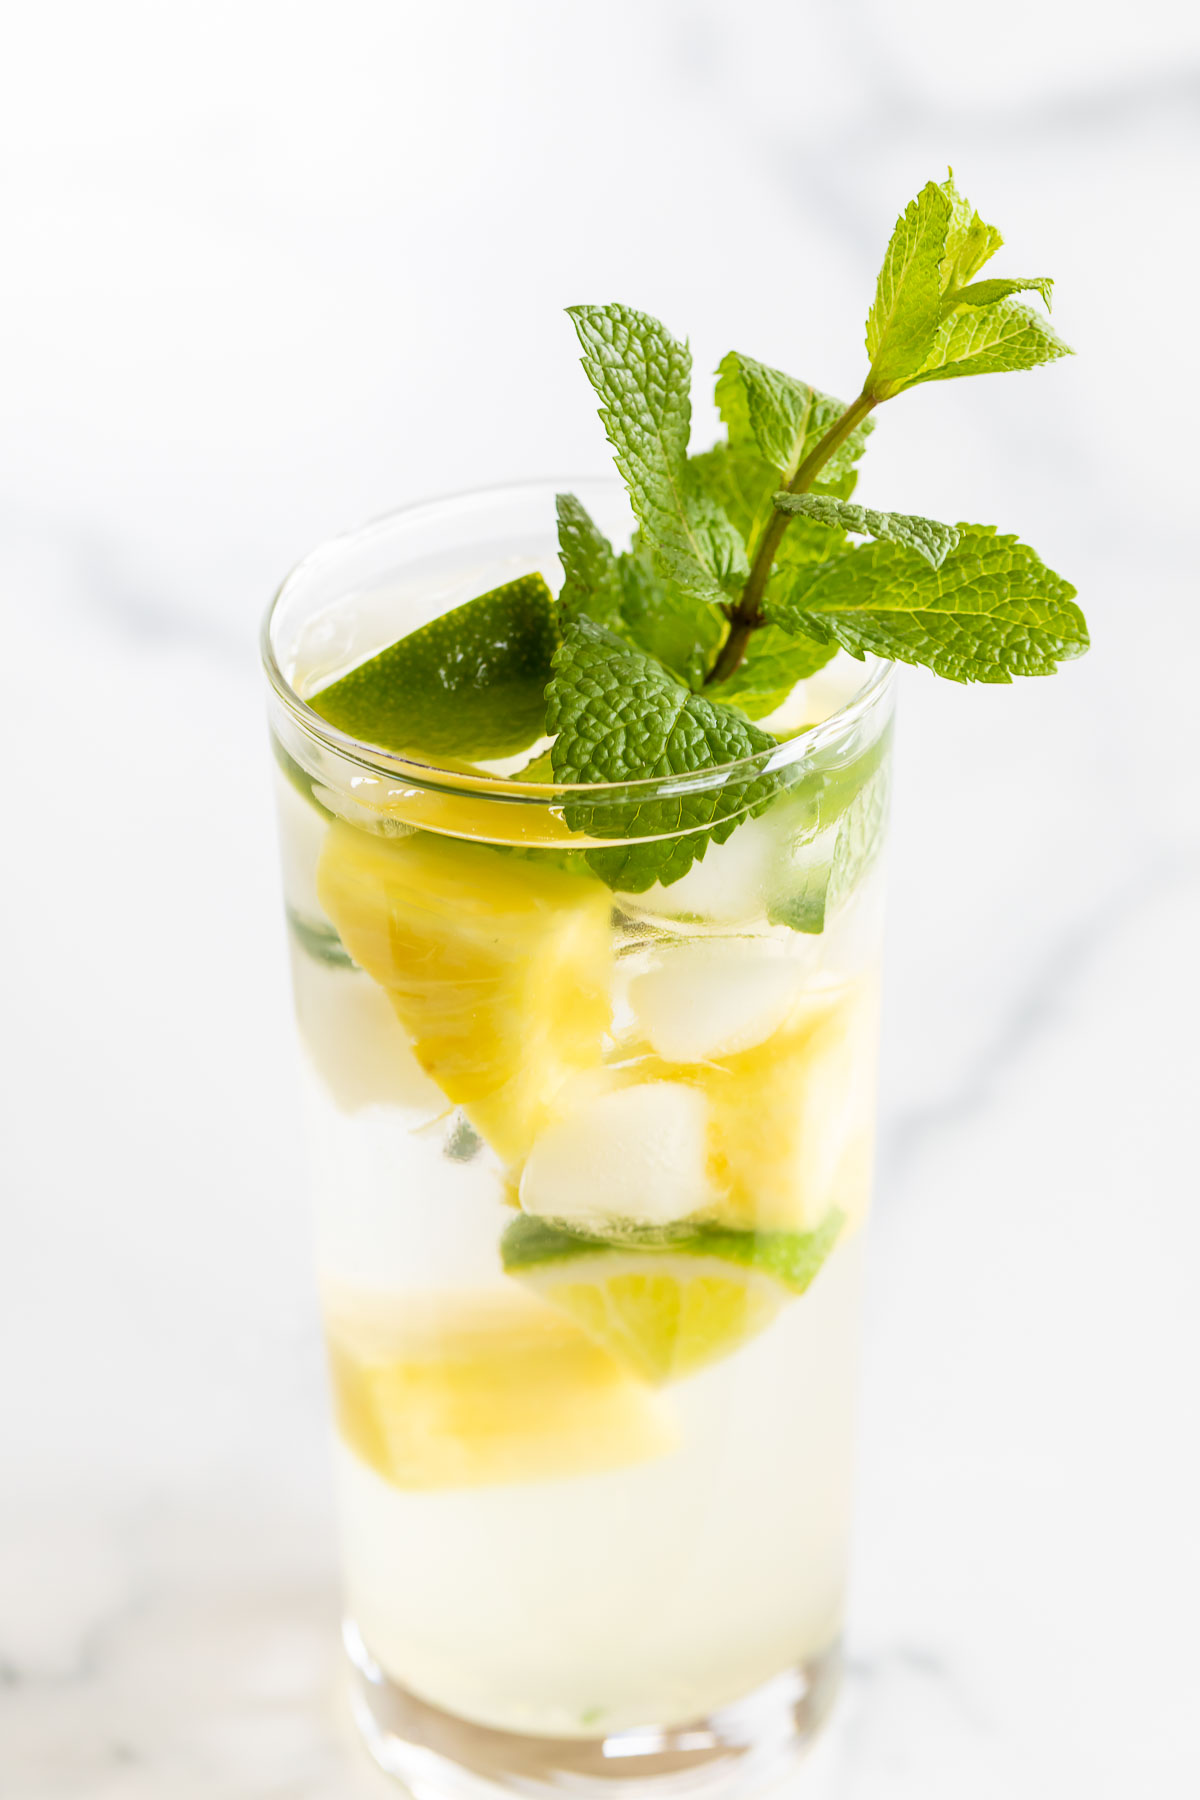 pineapple mojito in a clear glass on a marble countertop